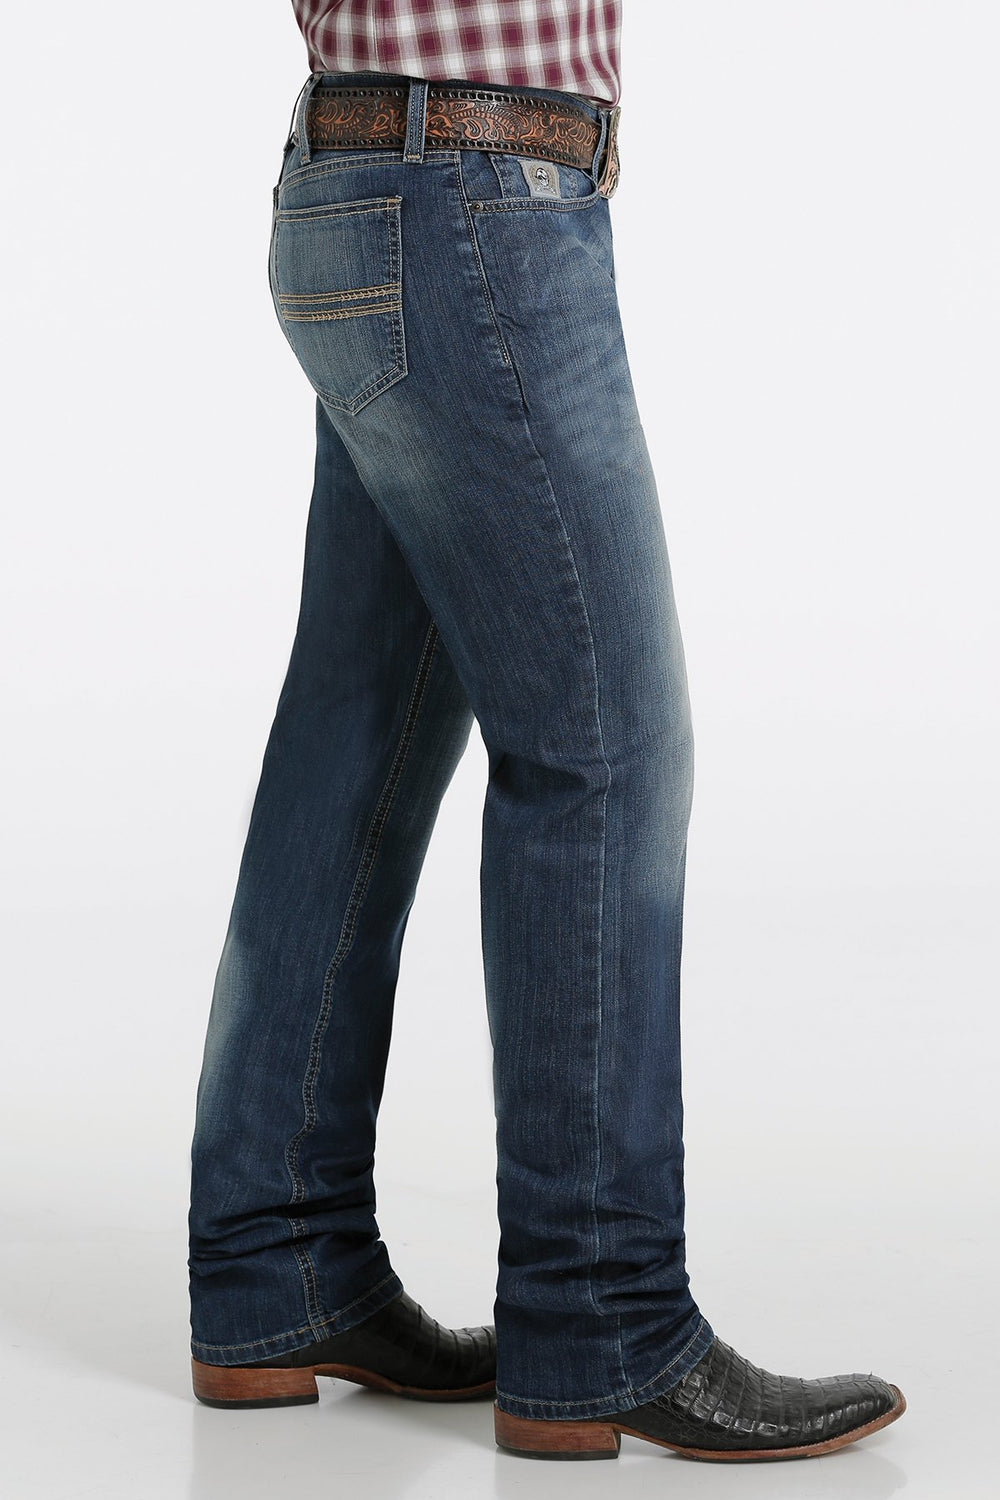 Cinch - Mens NEW Silver Label Jeans